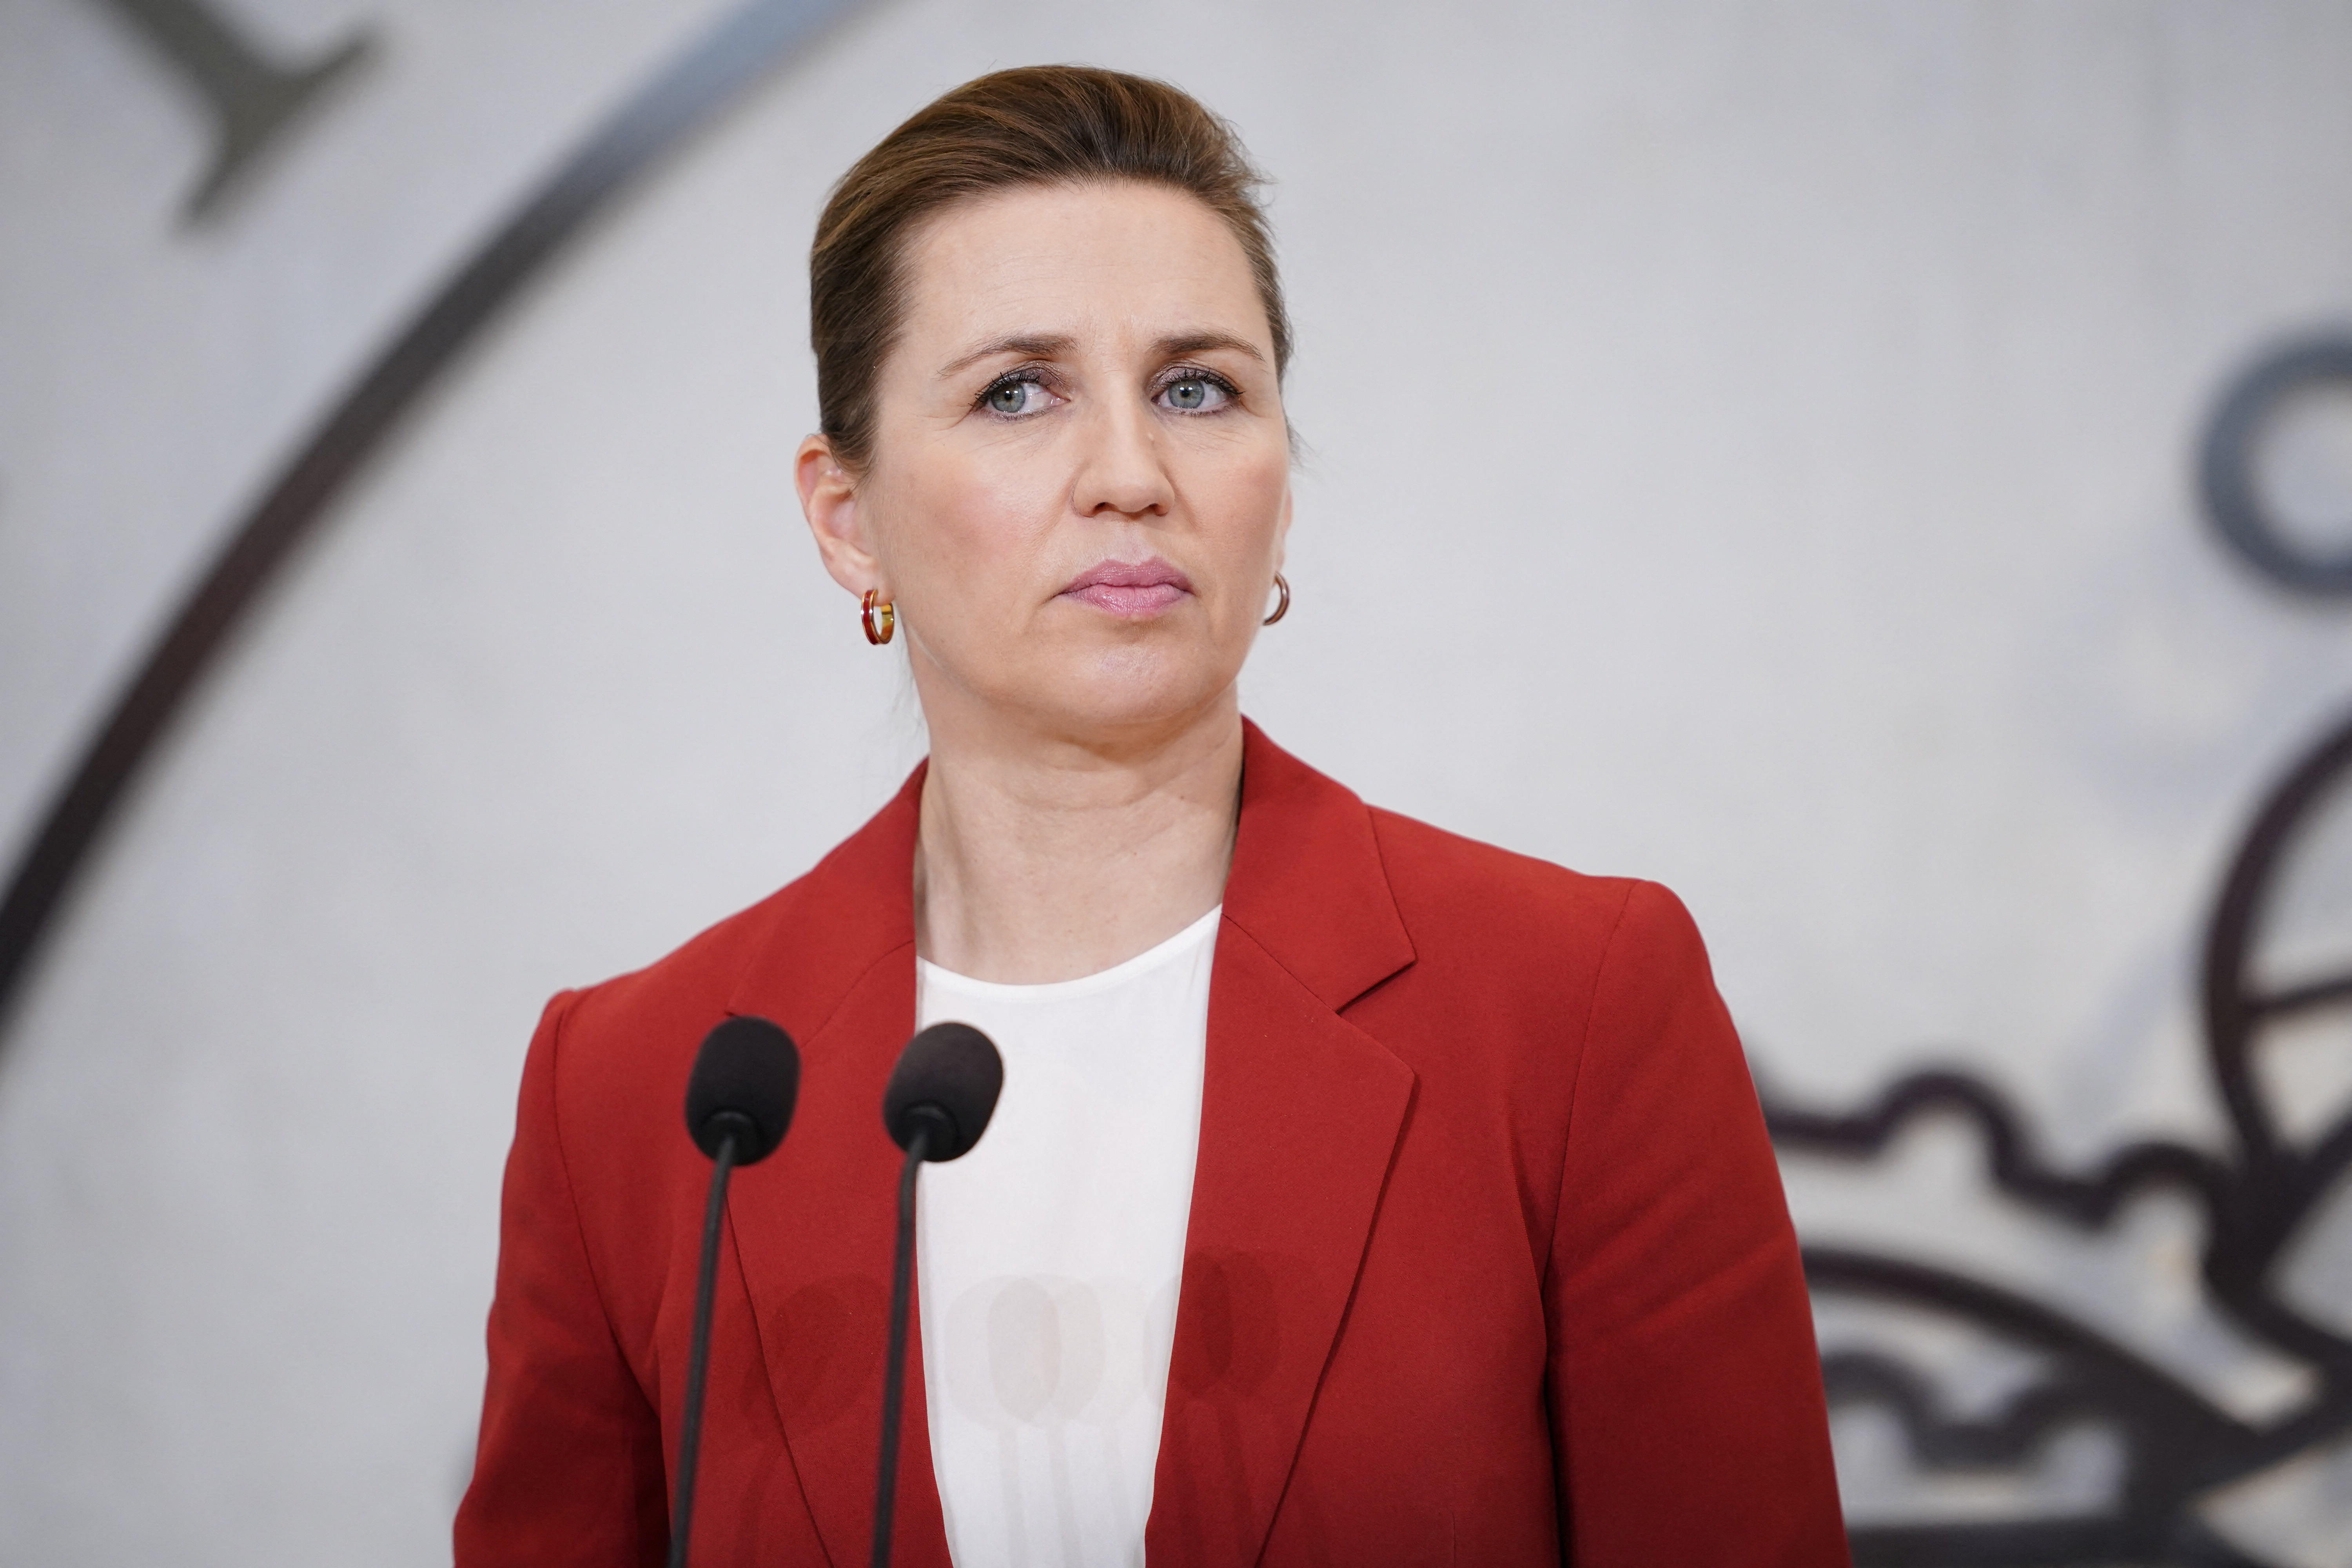 Danish Social Democrats agree new government with right-wing opposition